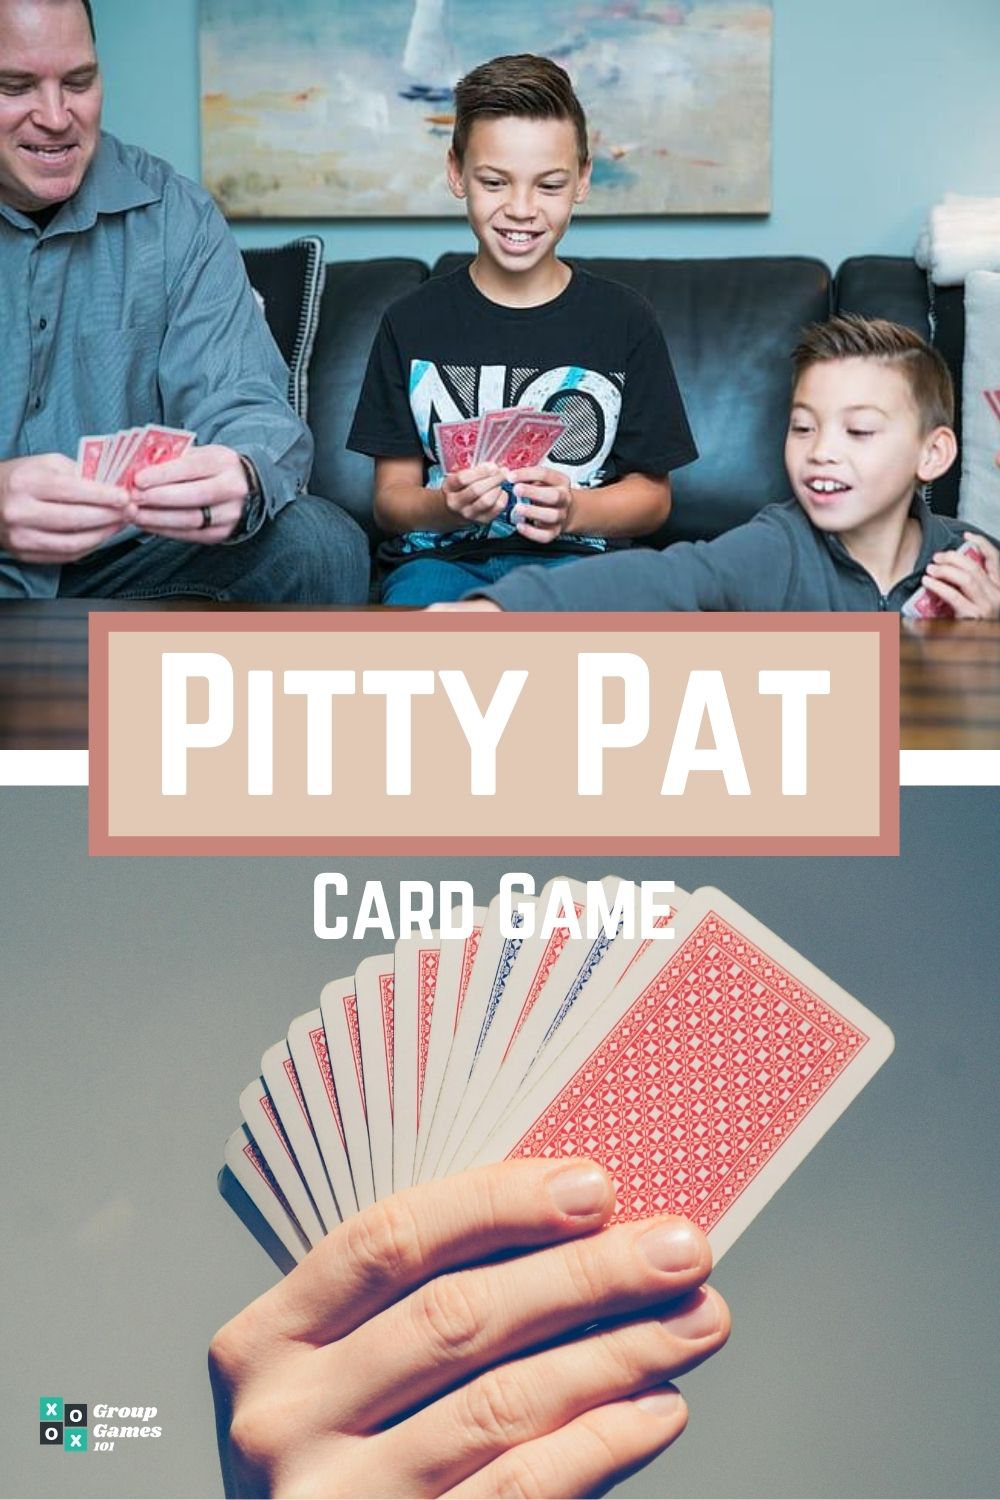 How to Play Pitty Pat Card Game Rules, Scoring and How to Win